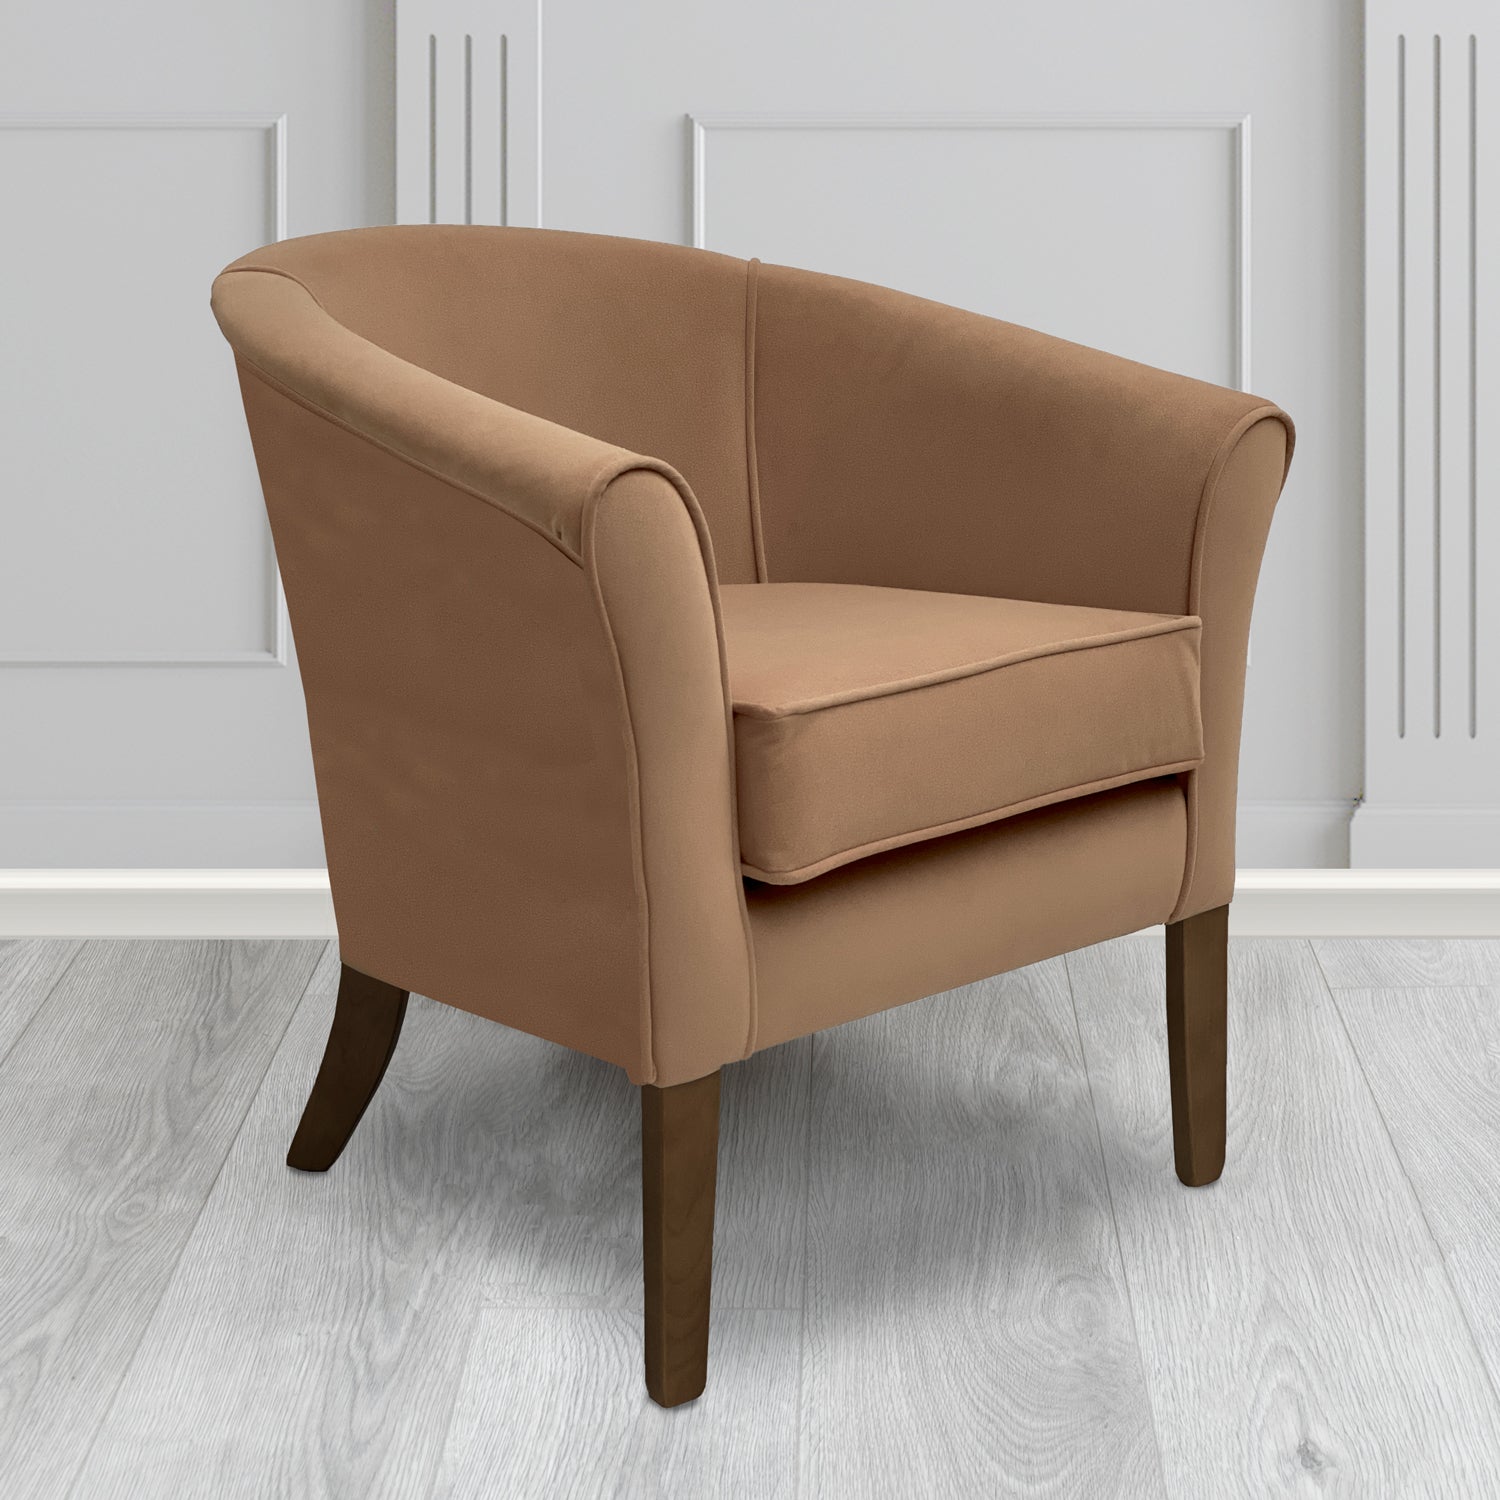 Aspen Tub Chair in Noble 806 Camel Crib 5 Velvet Fabric - Water Resistant - The Tub Chair Shop